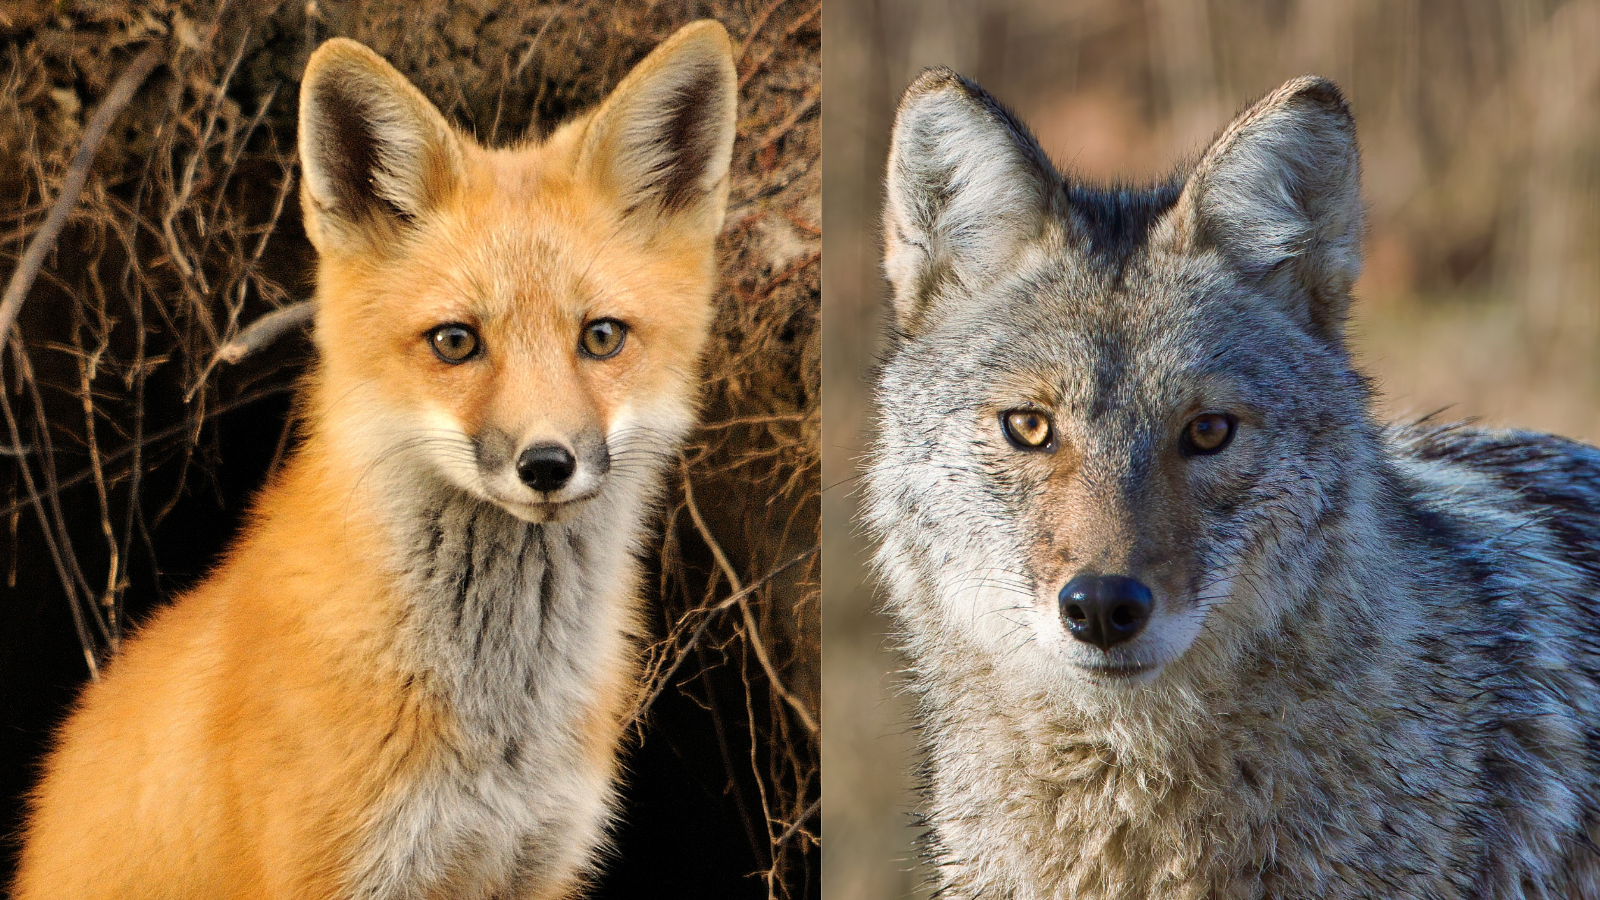 Image of Coyote and Fox